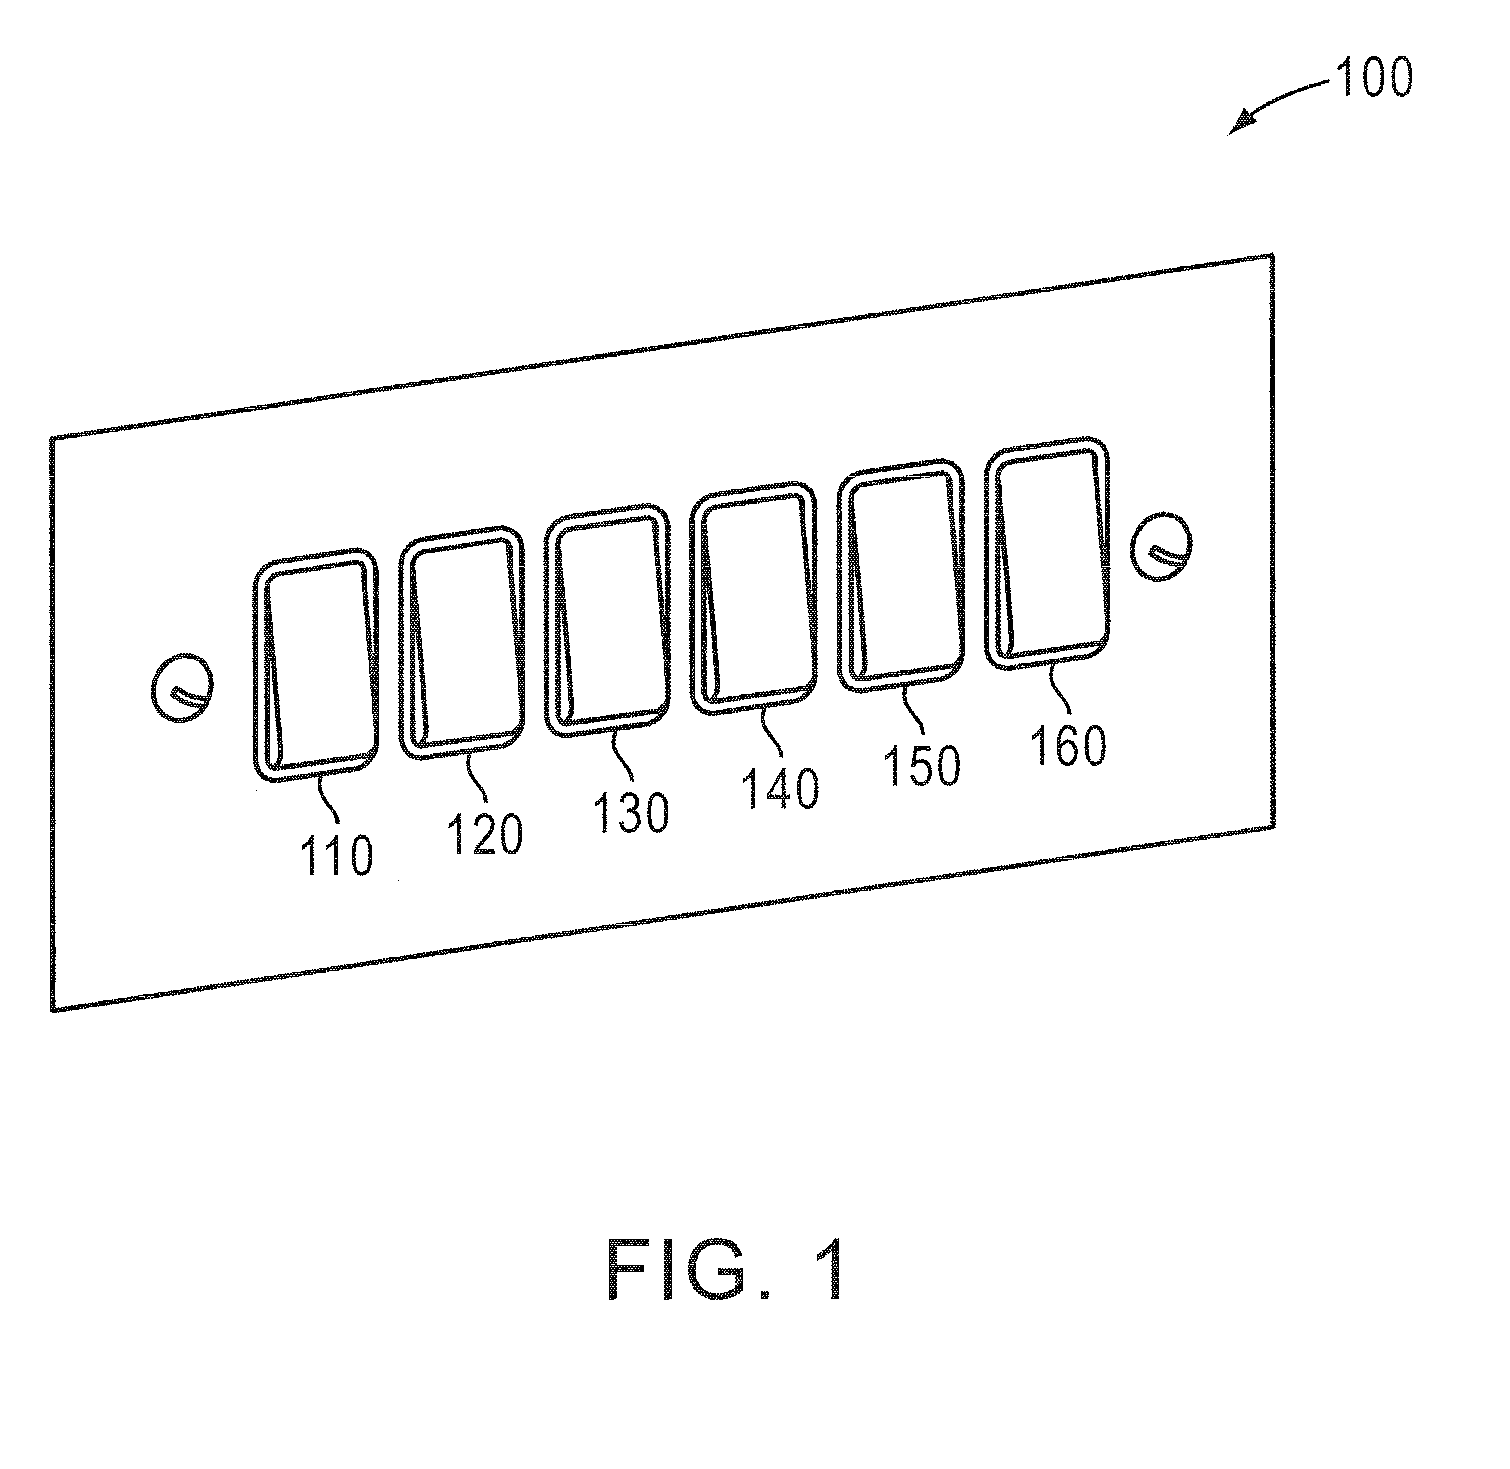 Virtual room-based light fixture and device control